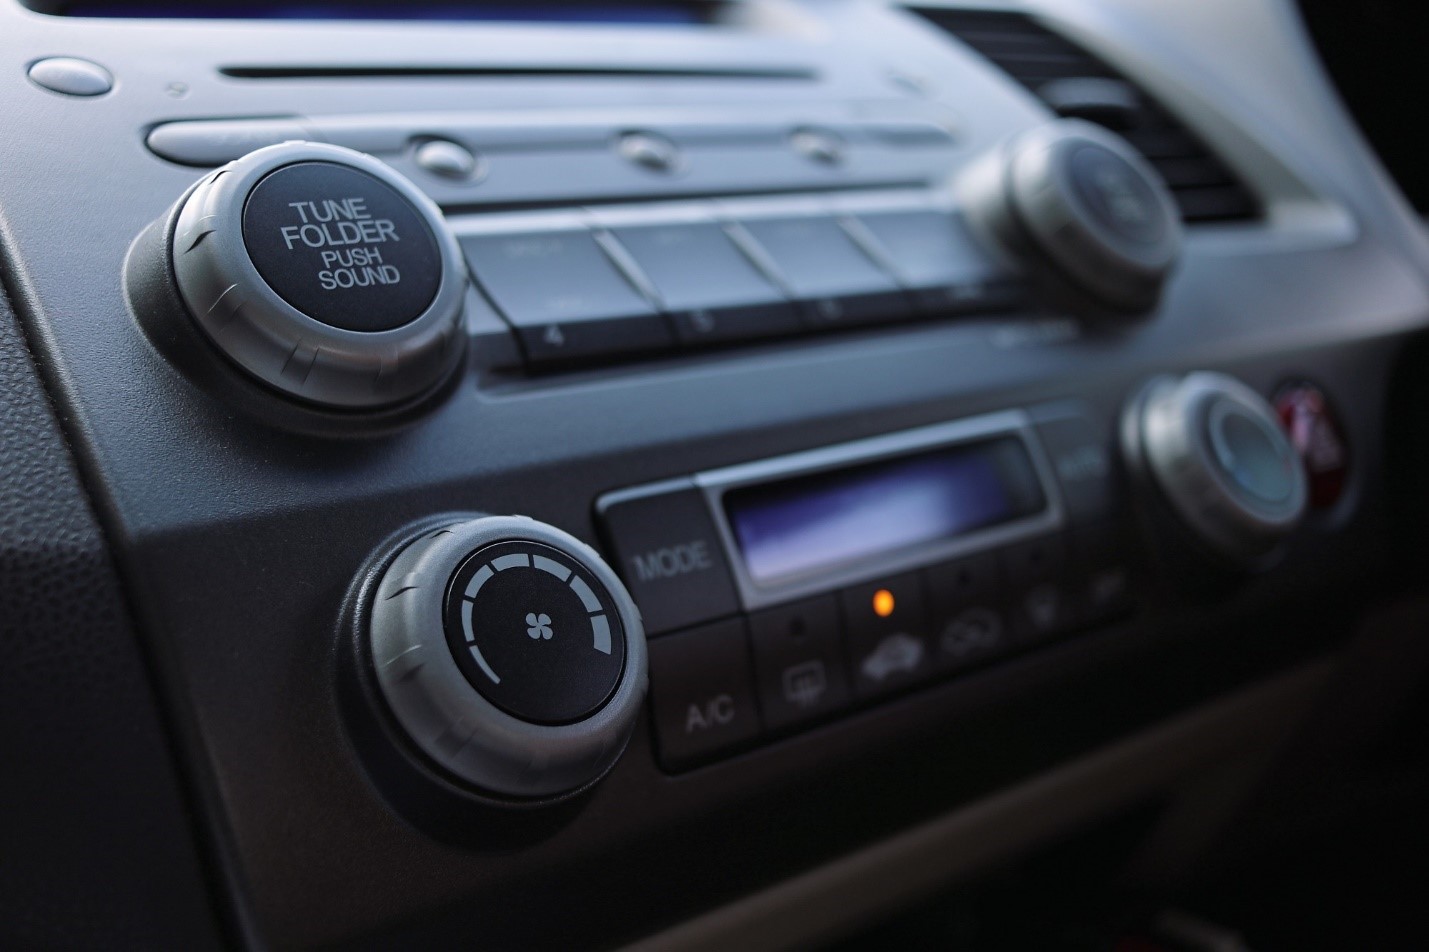 5 Things to Check When Shopping for Car Audio System